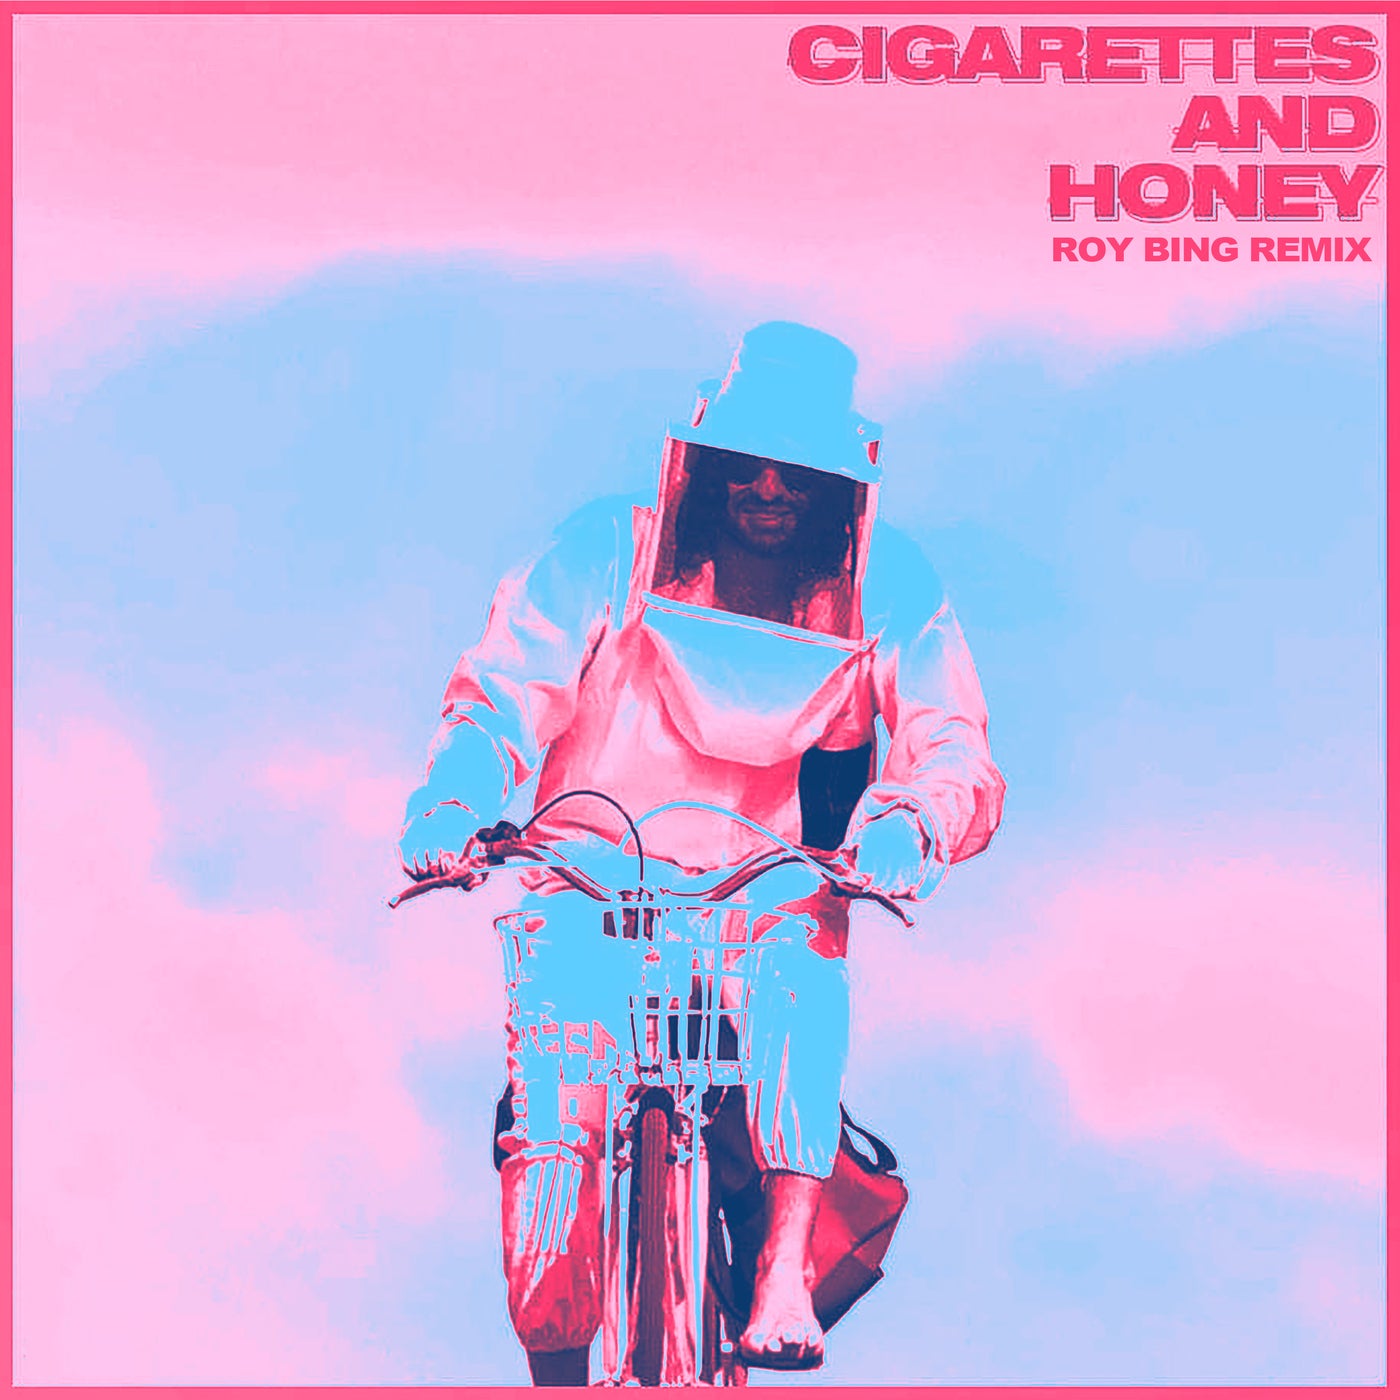 Cigarettes and Honey (Roy Bing Remix)